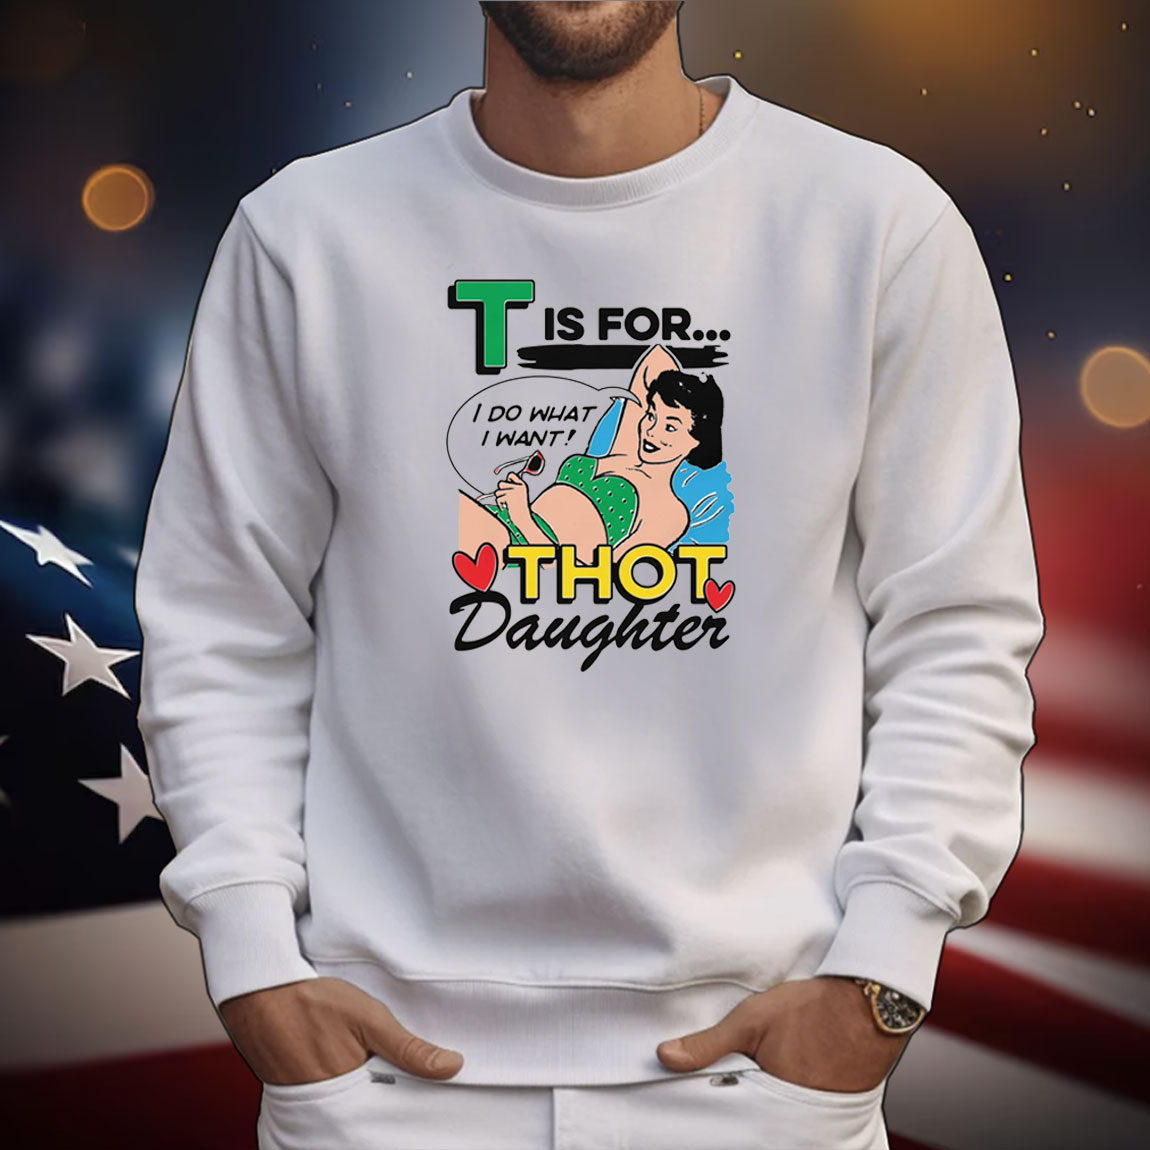 T Is For Thot Daughter Tee Shirts